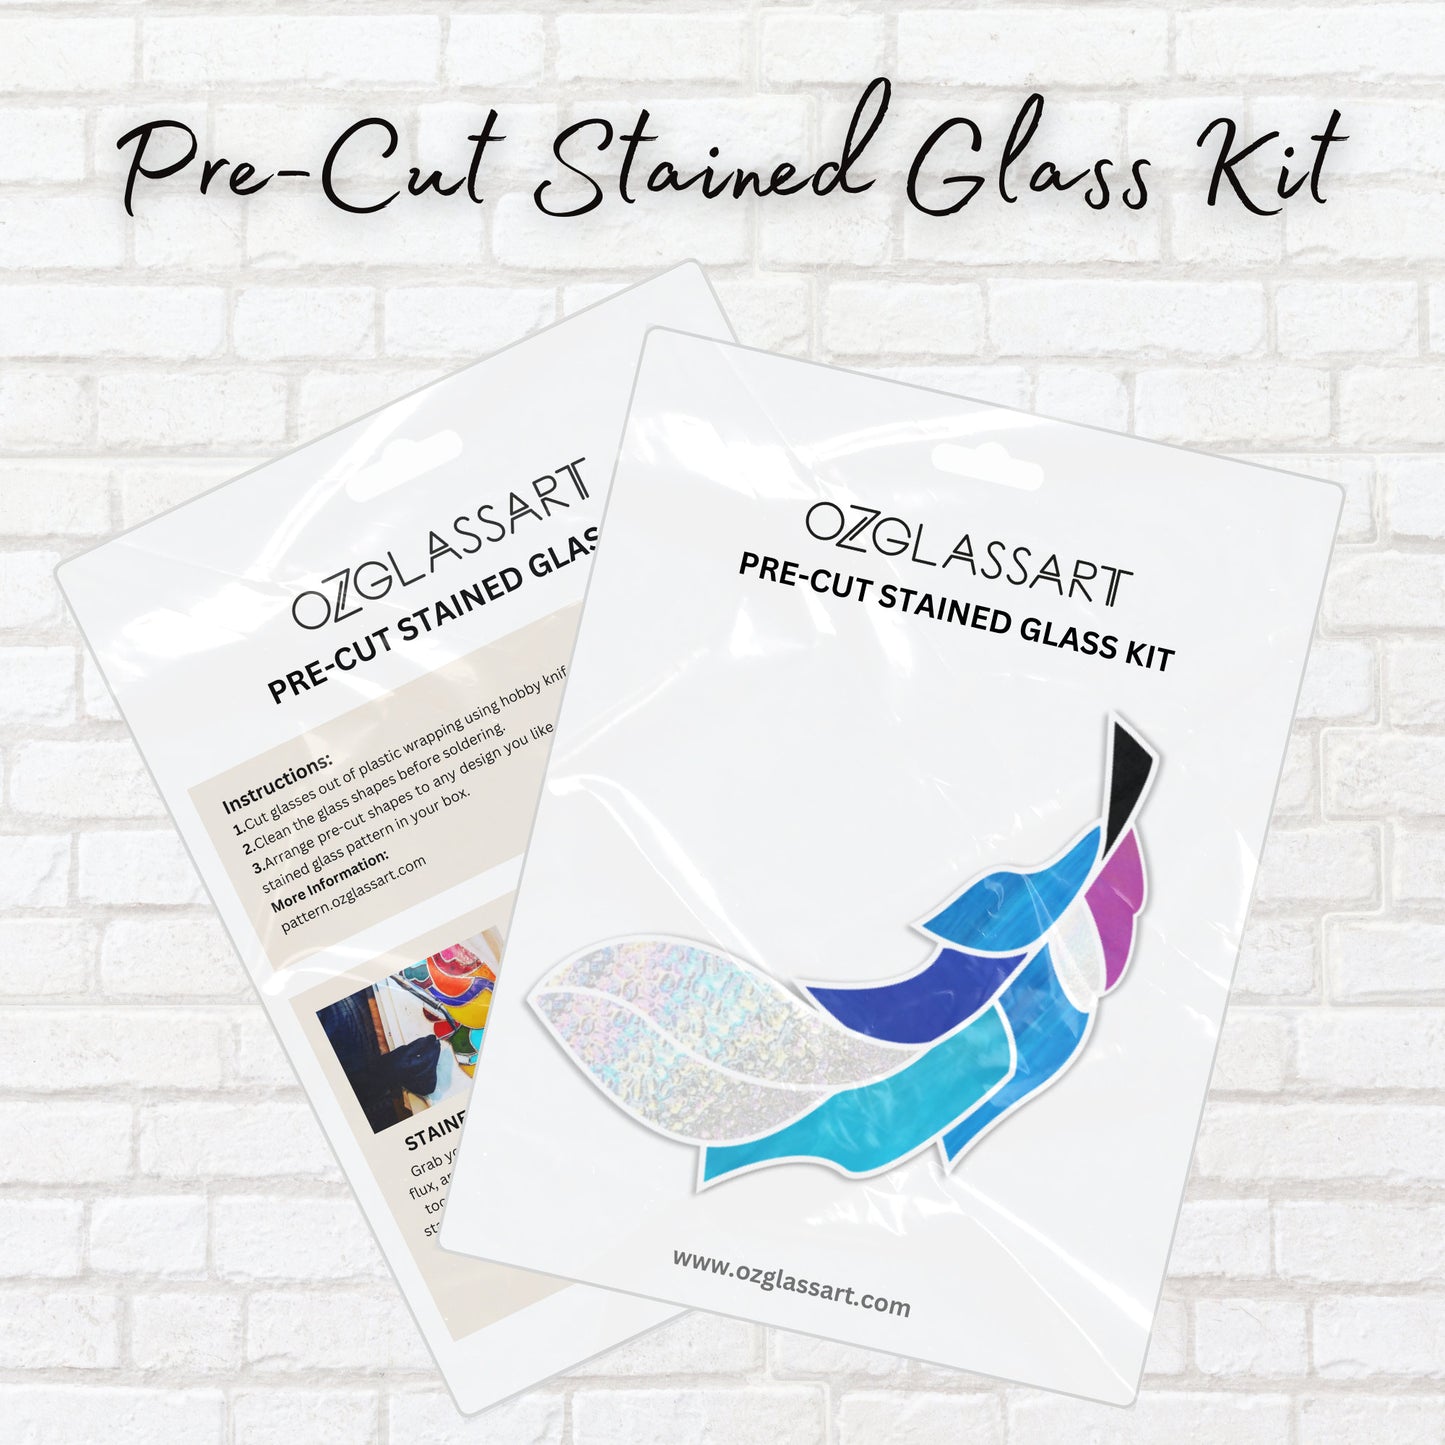 Precut Feather Stained Glass Kit - Stained Glass Feather Kit, Pre-cut glass Kit - DIY Glass Kit, Mosaic, Stepping Stone